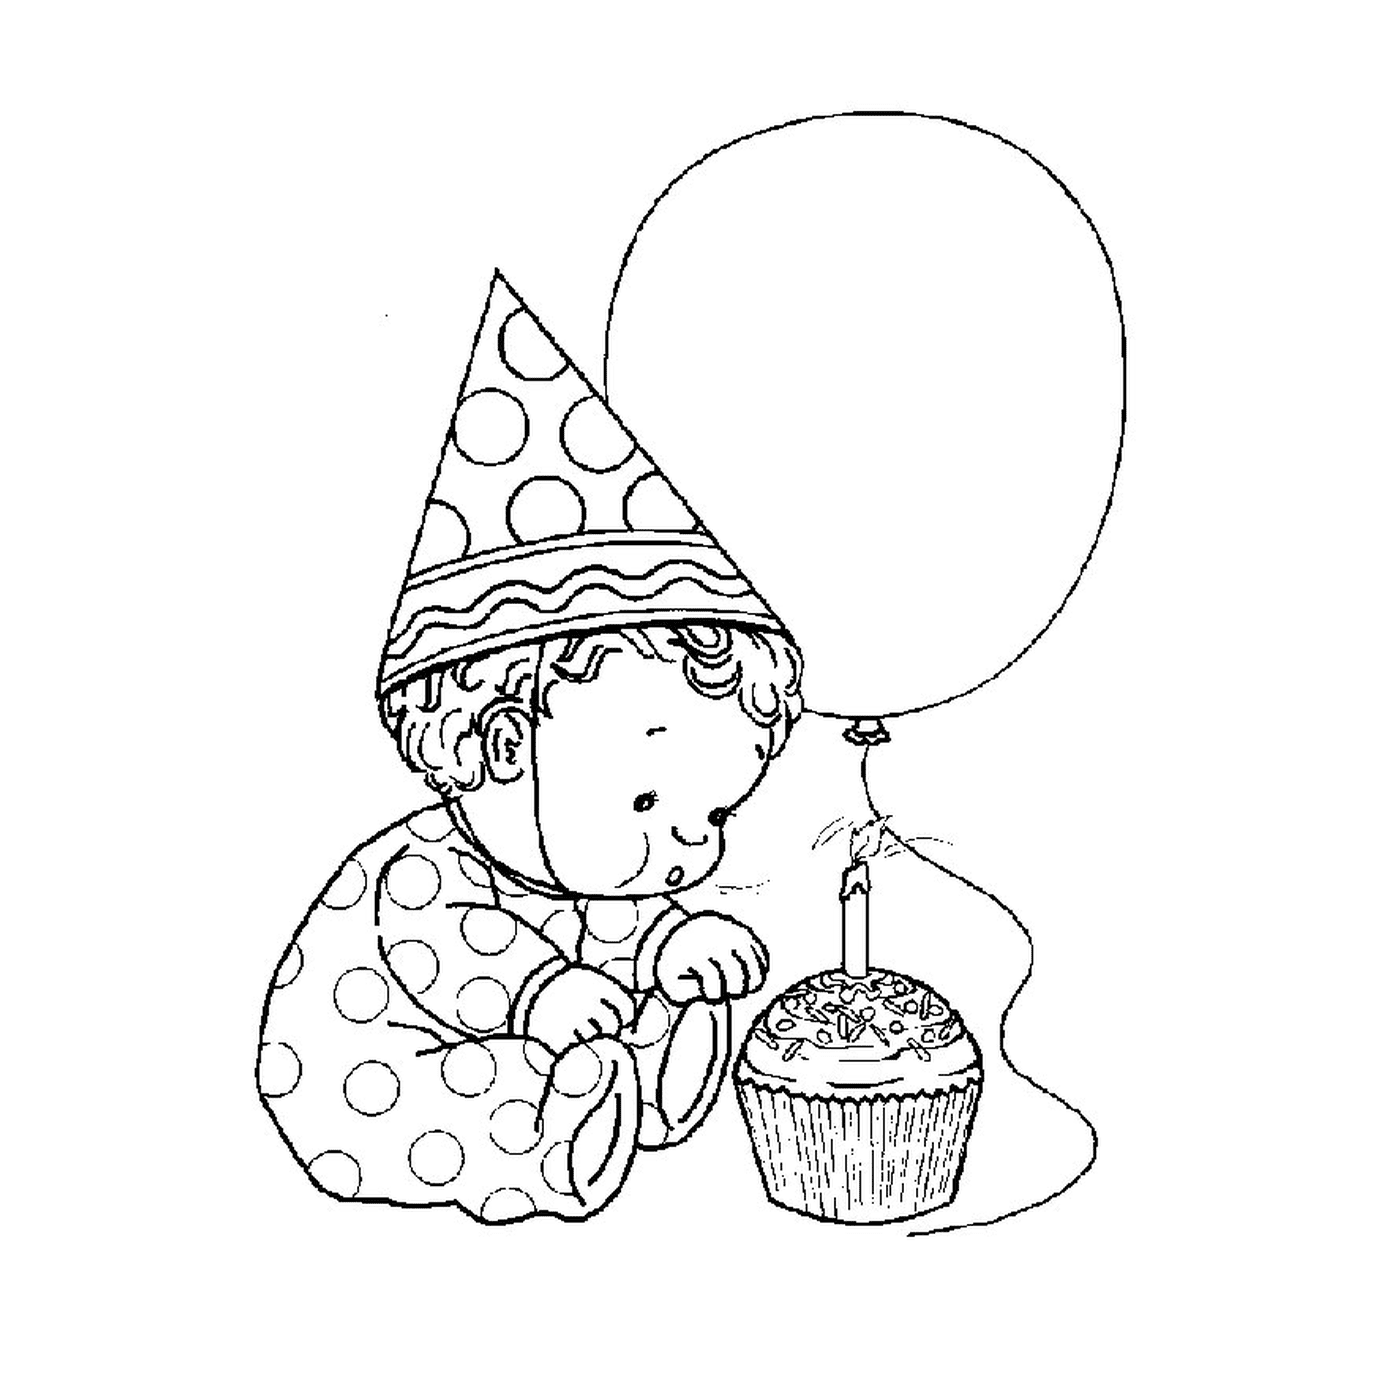  a baby with a party hat blowing a candle 